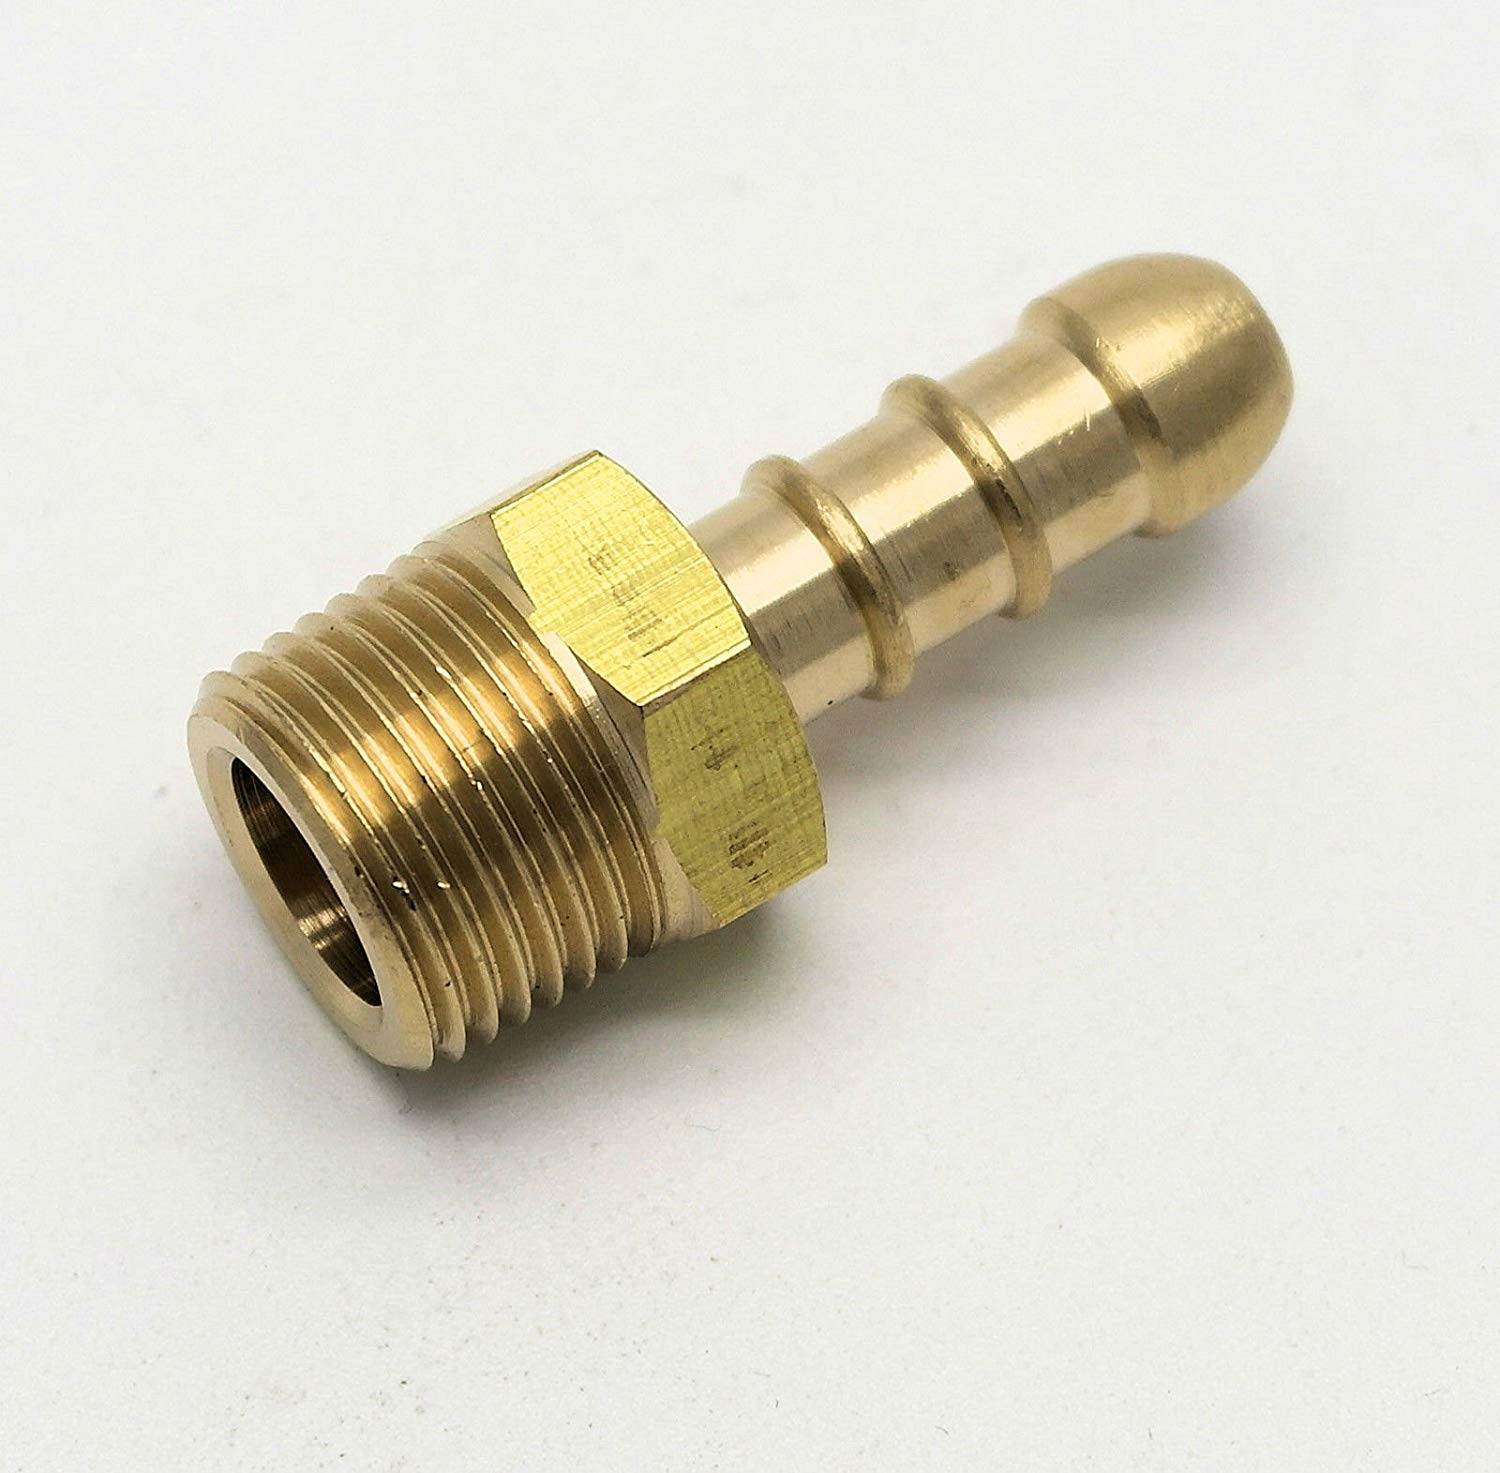 B2-00388 3/8 BSPT X 3/8 10 TAIL FULLHAM NOZZLE HOSE CONNECTOR 